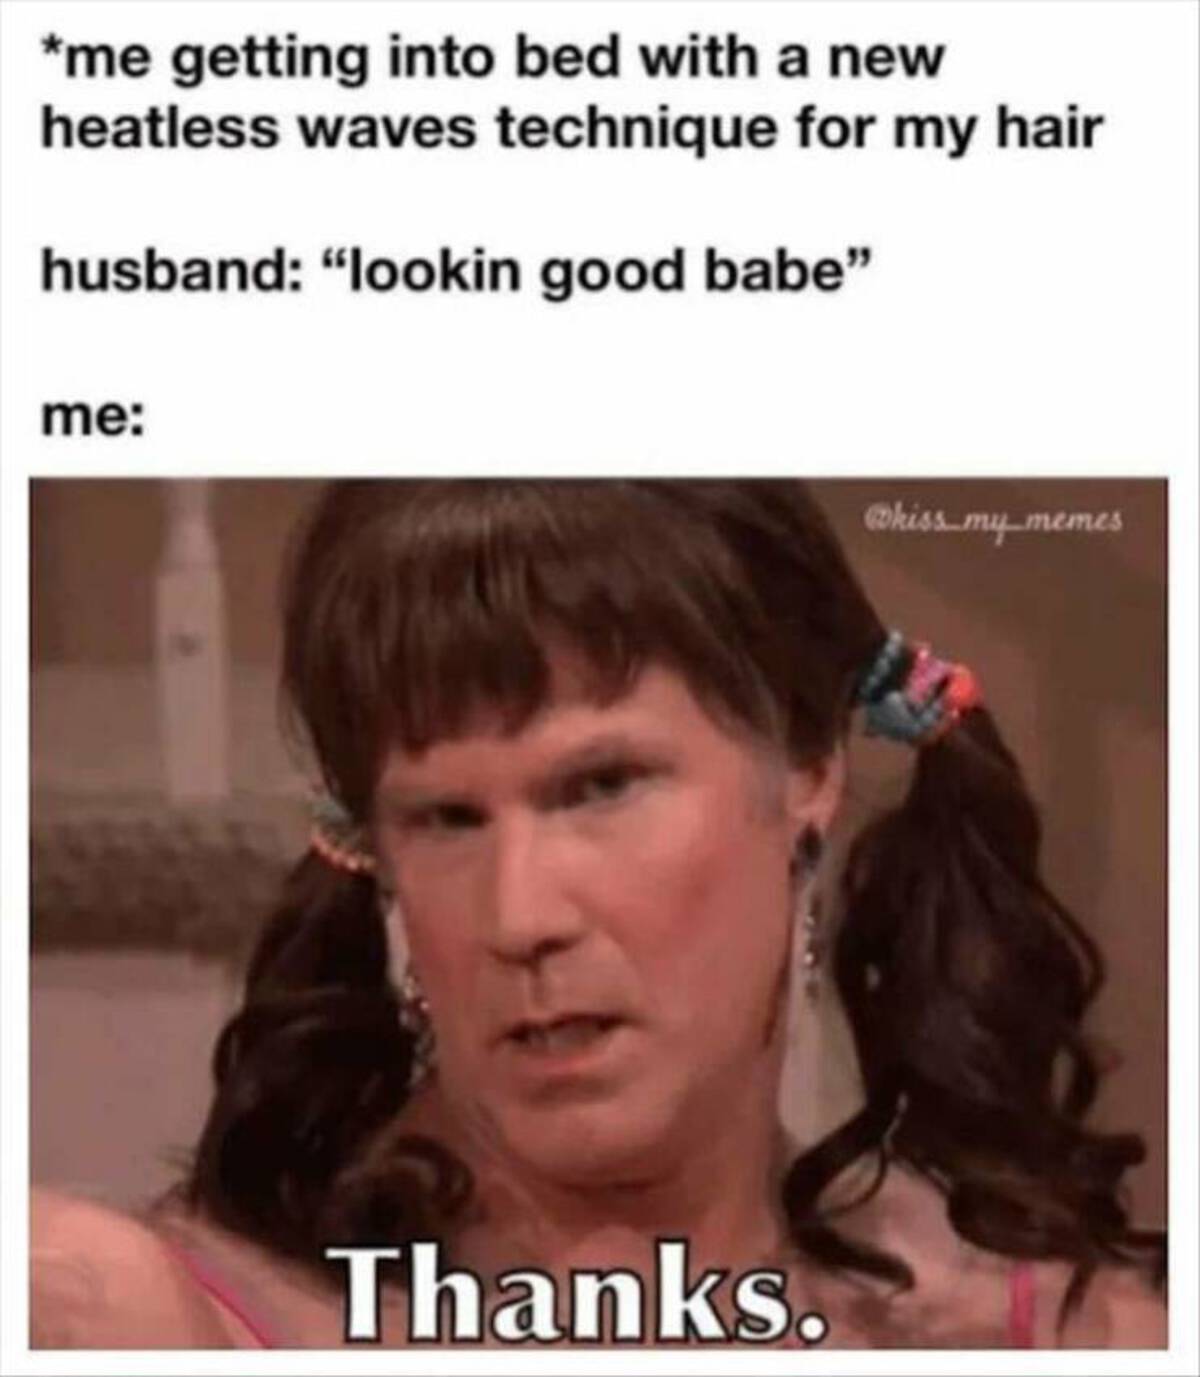 Meme - me getting into bed with a new heatless waves technique for my hair husband "lookin good babe" me Thanks. my memes